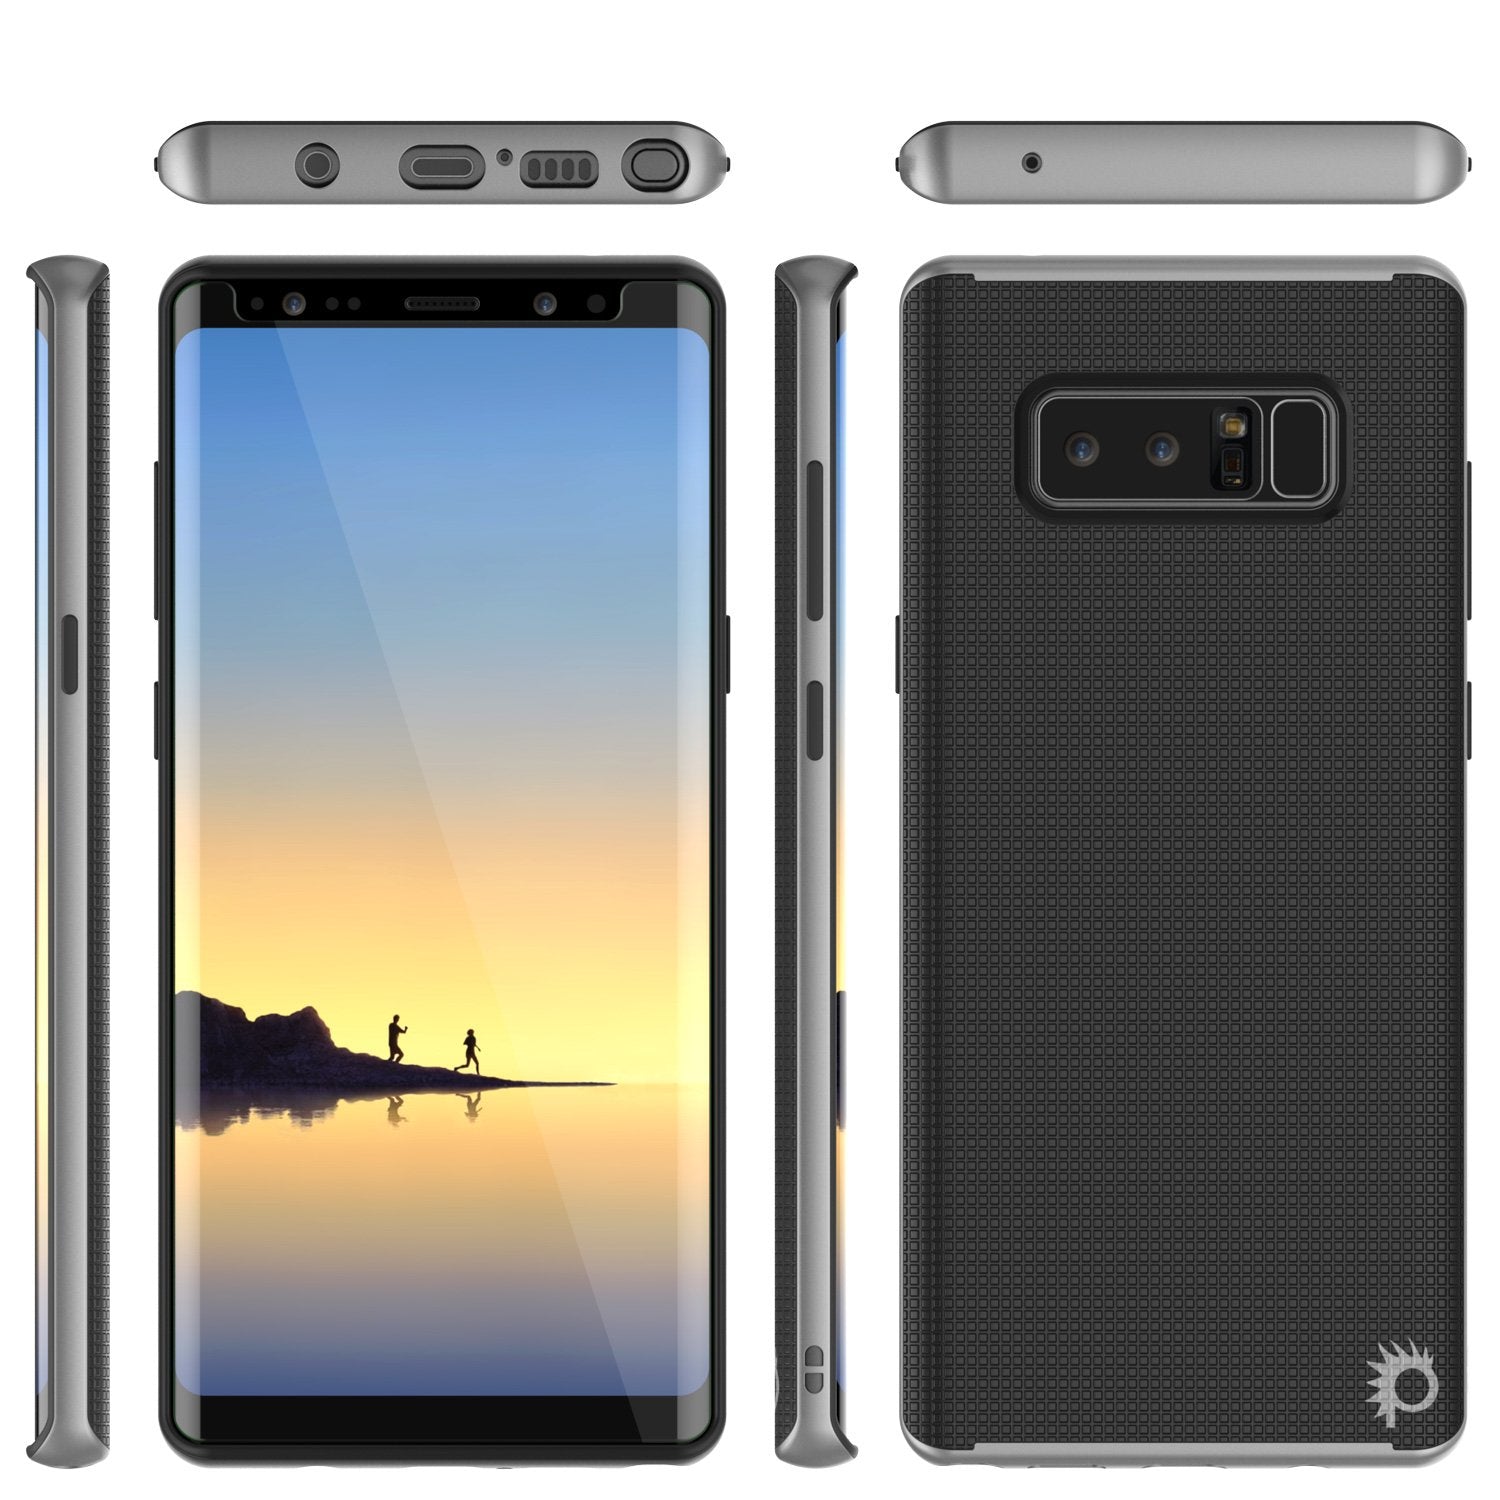 Galaxy Note 8 Case, PunkCase Stealth Silver Series Hybrid 3-Piece Shockproof Dual Layer Cover